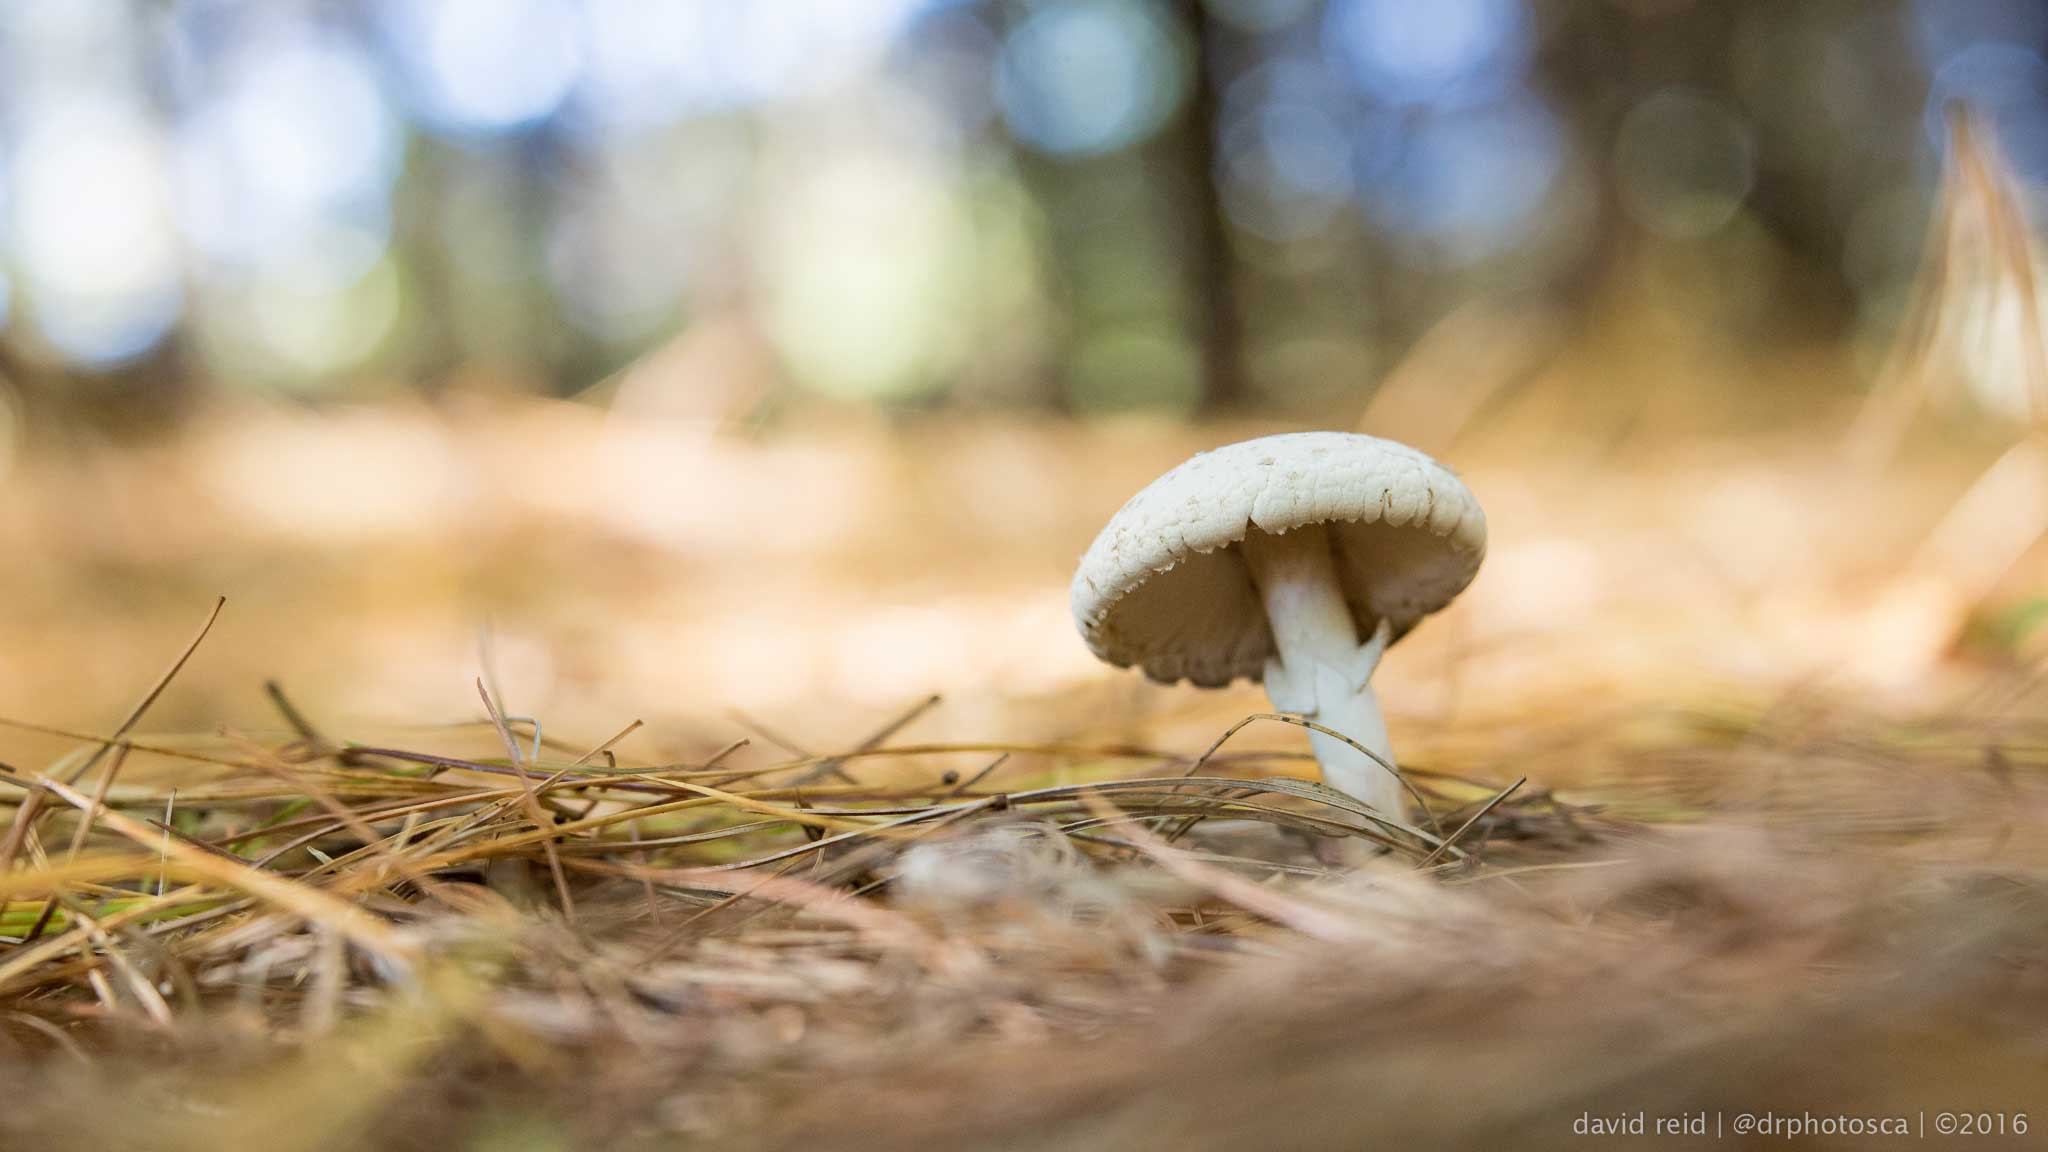 How a walk in the forest can improve your photography skills for any Canon camera.